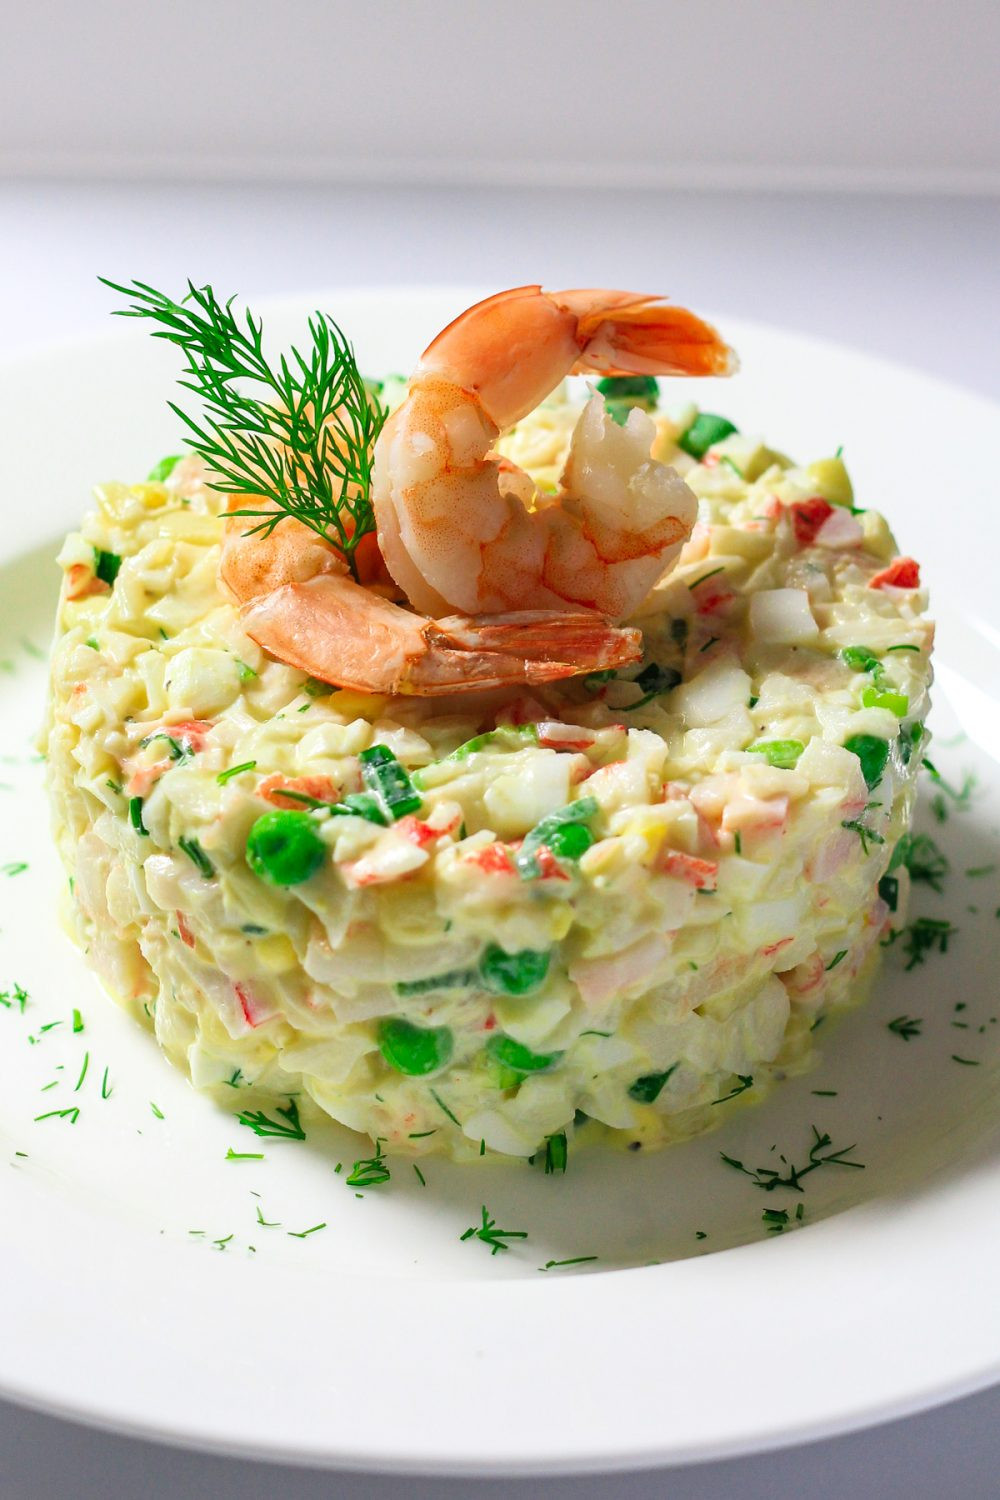 Seafood Salad Recipe With Crabmeat And Shrimp
 Imitation Crab Salad with Shrimp Recipe VIDEO Simply